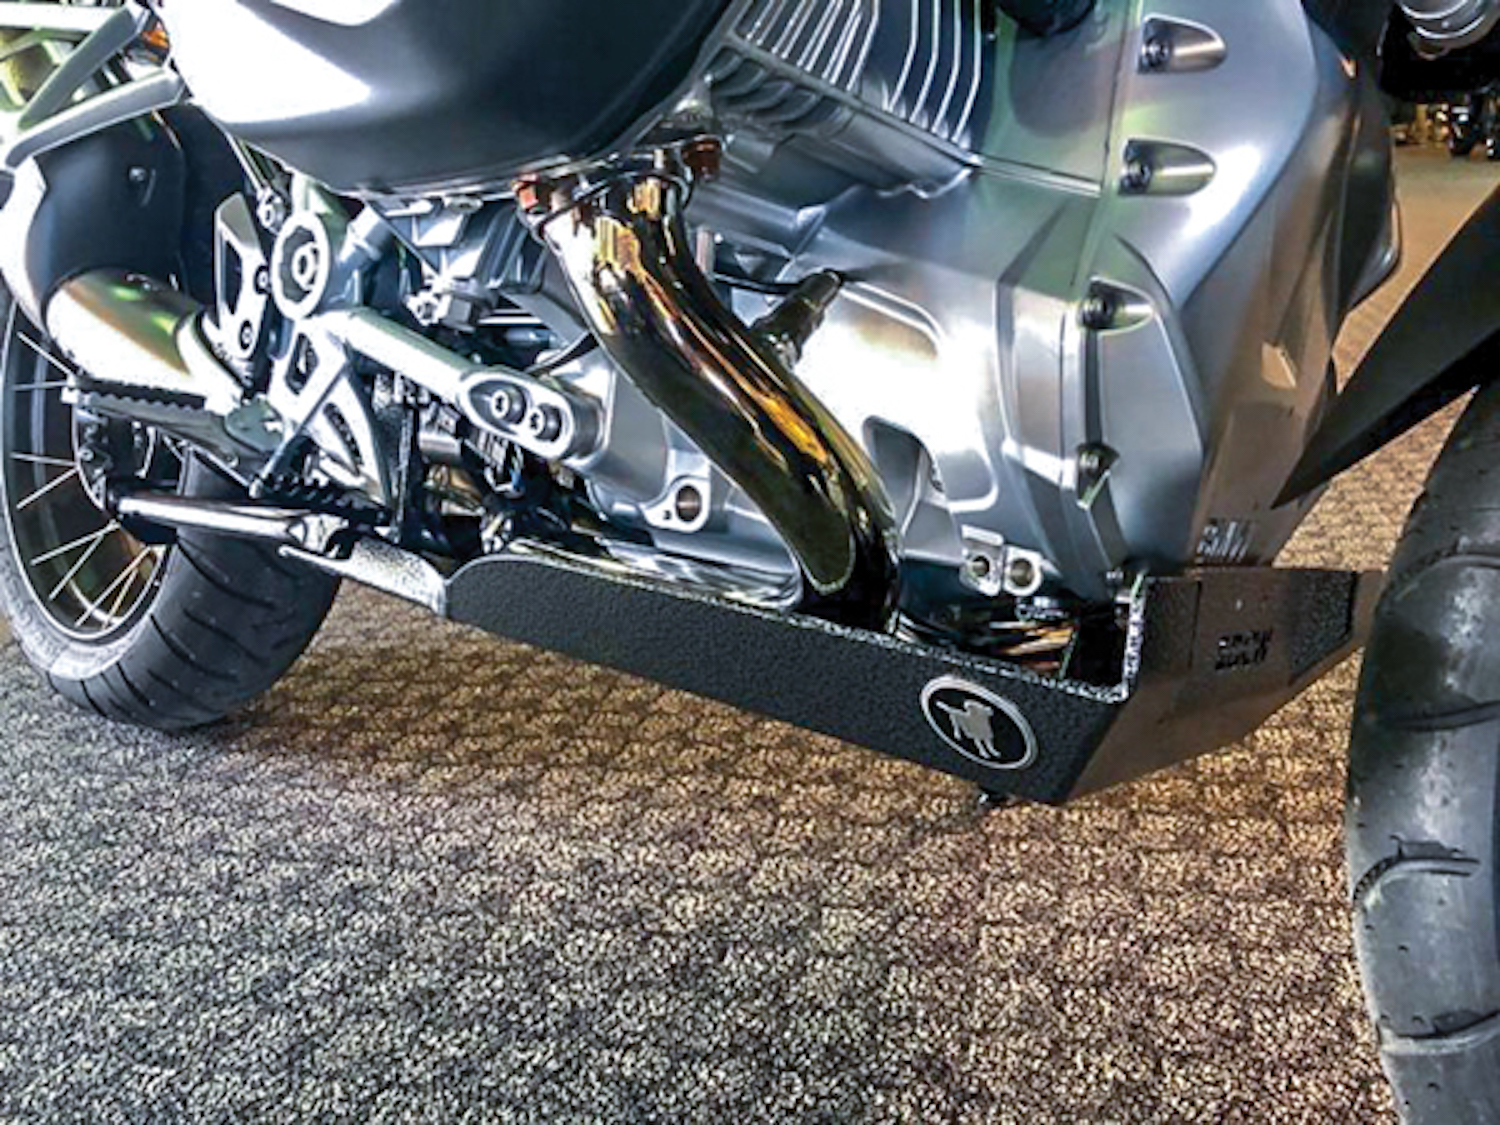 A view of the ULTIMATE skid plate created by Black Dog Cycle, which will be celebrating a 15% discount, thanks to the website's anniversary celebration